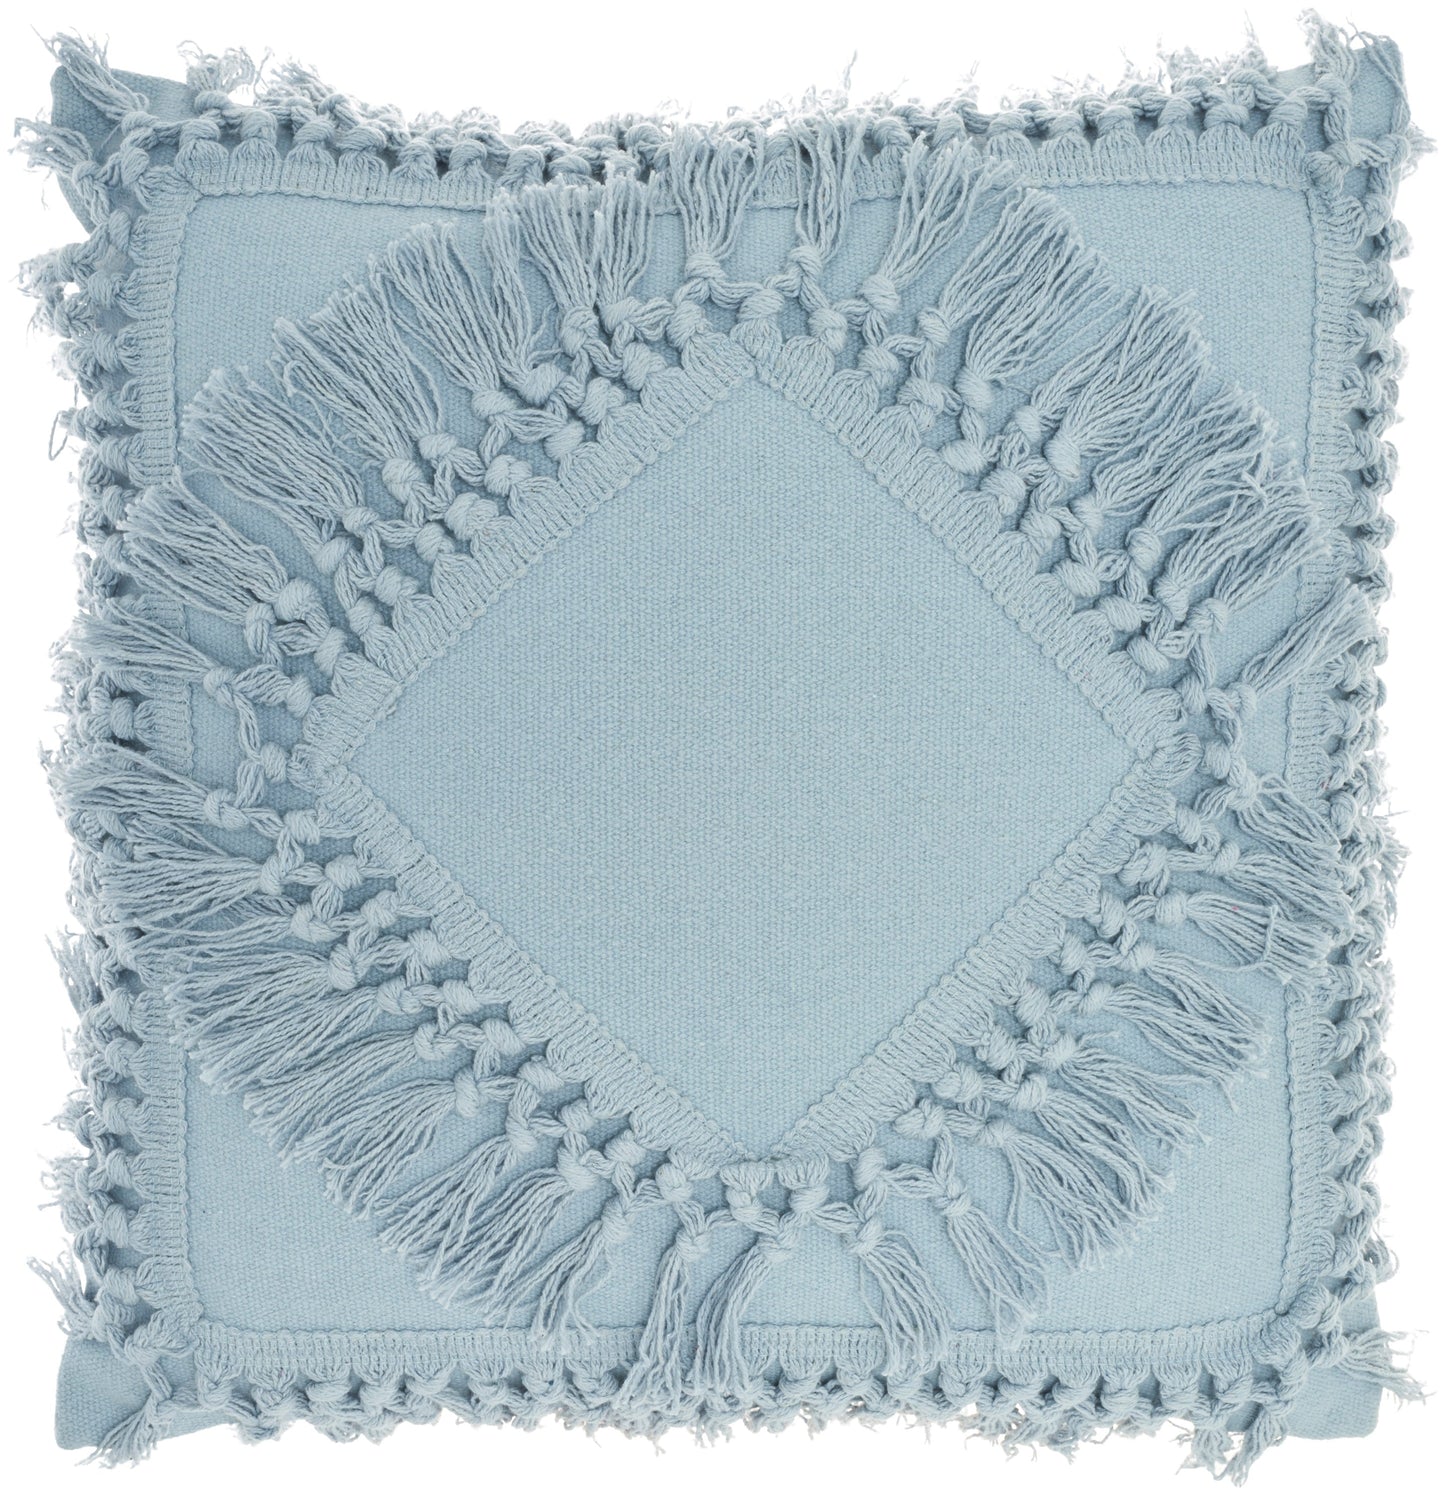 Nicole Curtis Pillow RJ199 Cotton Diamond Fringe Throw Pillow From Nicole Curtis By Nourison Rugs